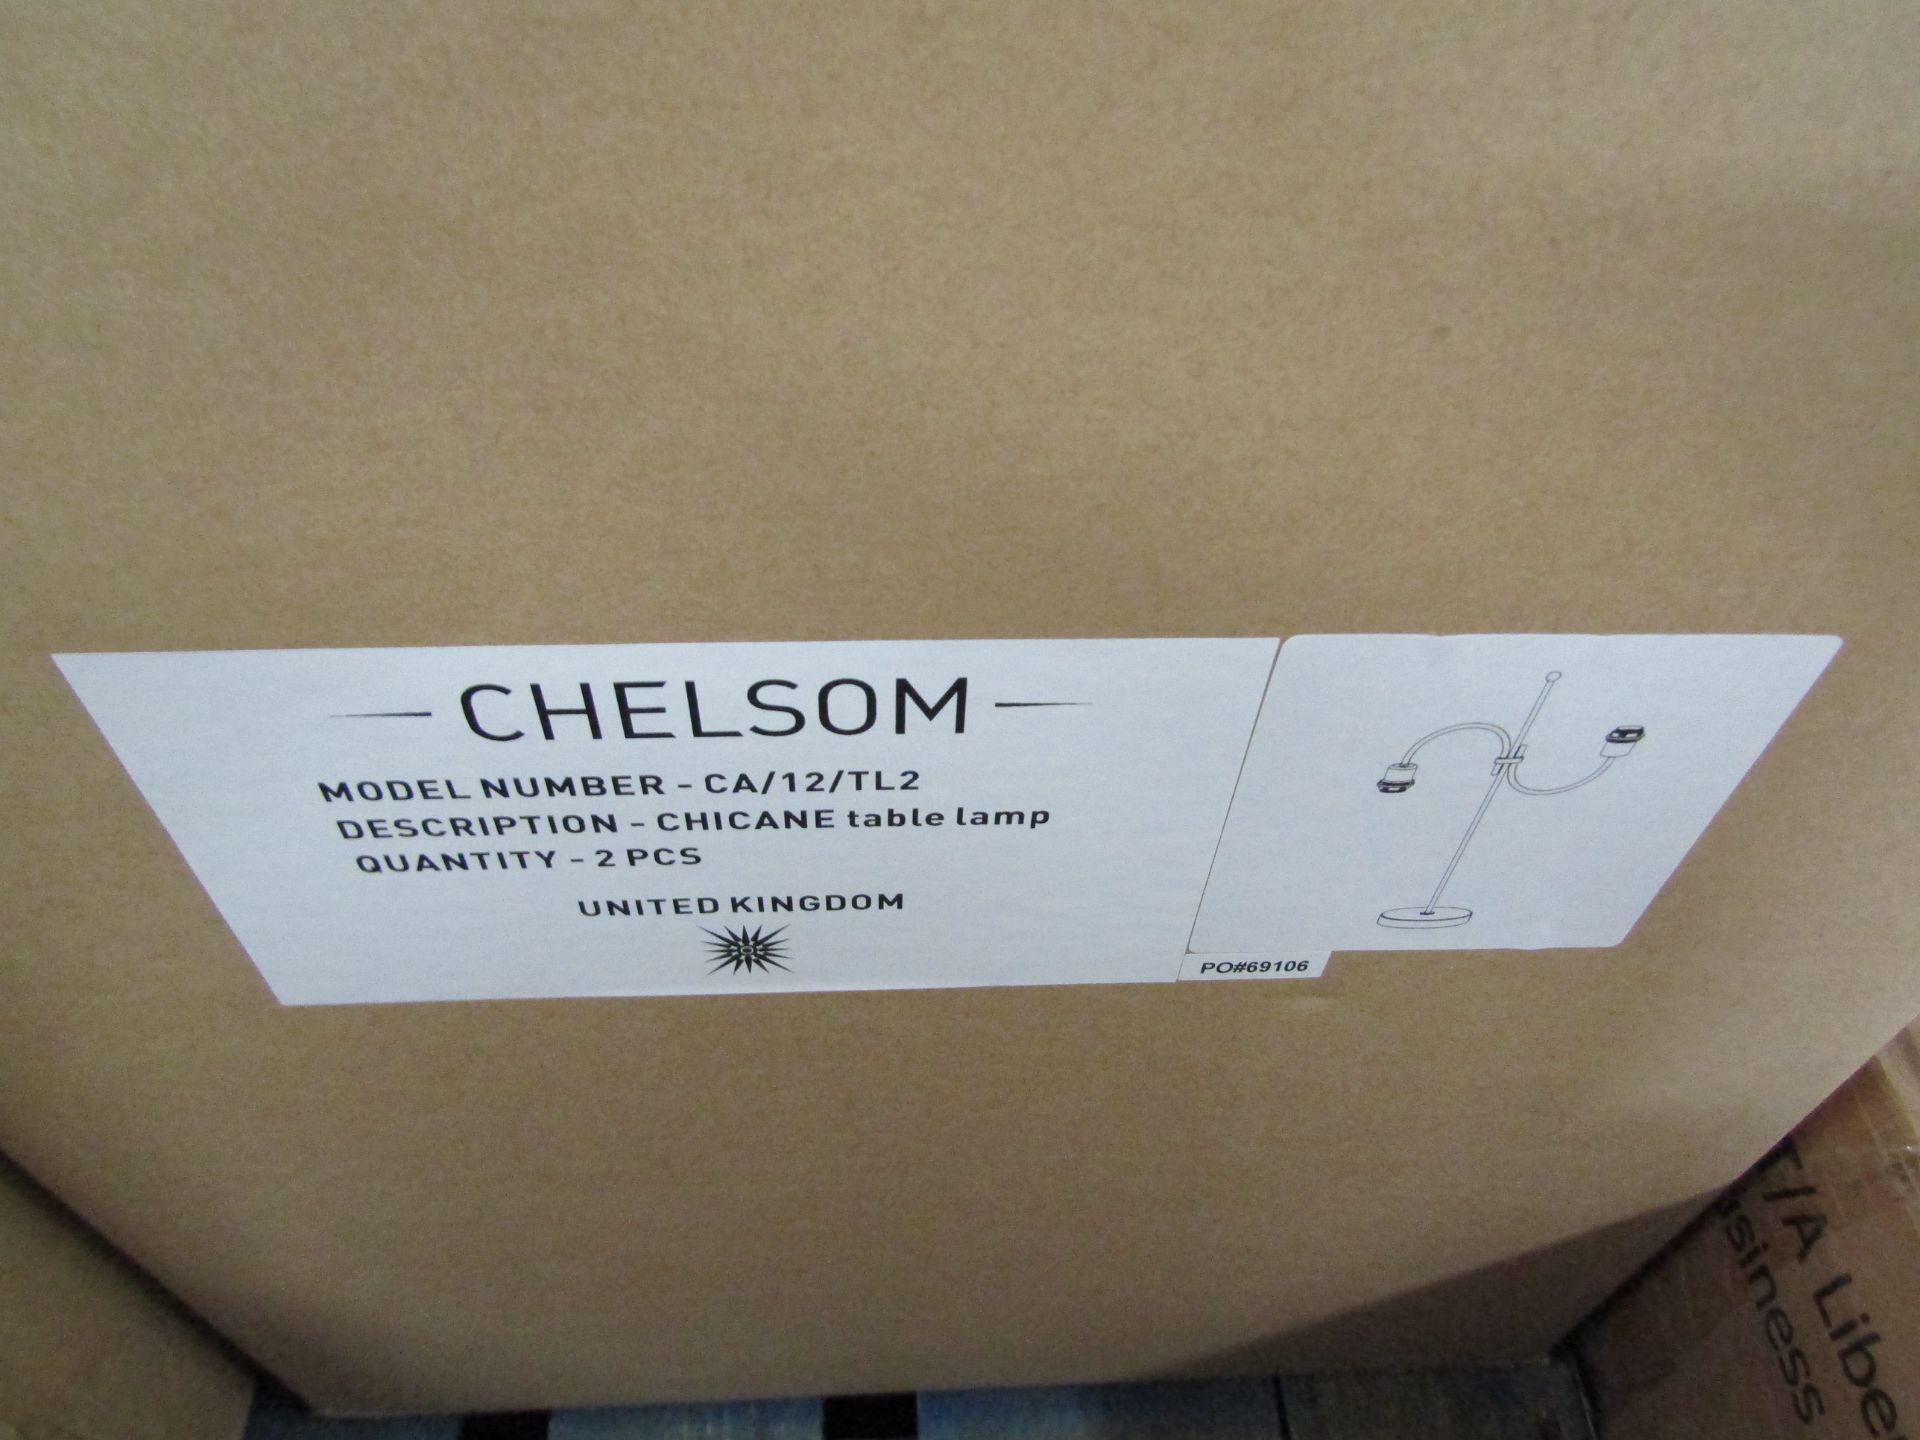 Chelsom Chicane Table Lamp, - CA/12/TL2, Unused & Boxed.